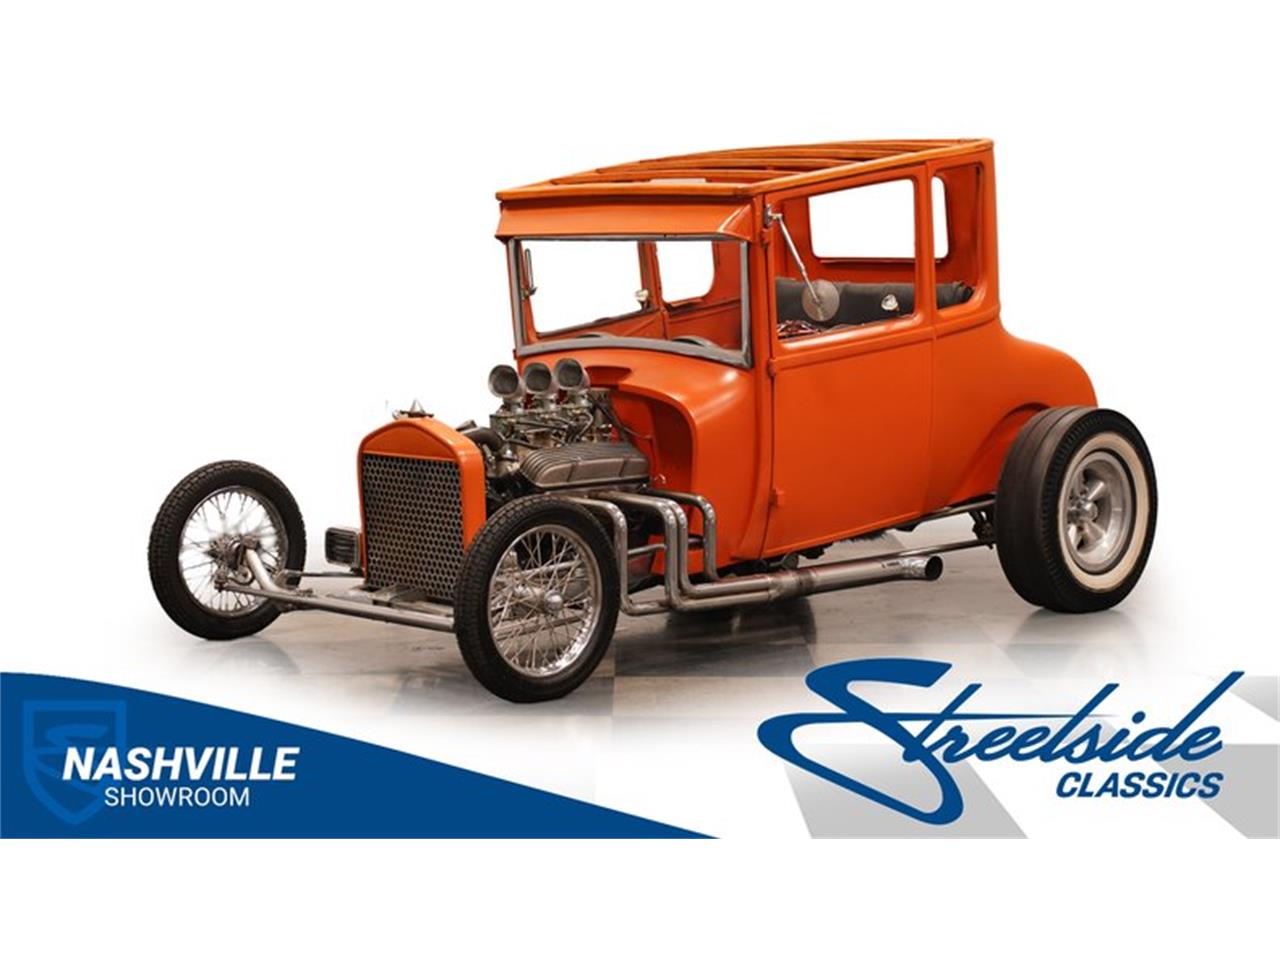 For Sale: 1926 Ford Model T in Lavergne, Tennessee for sale in La Vergne, TN